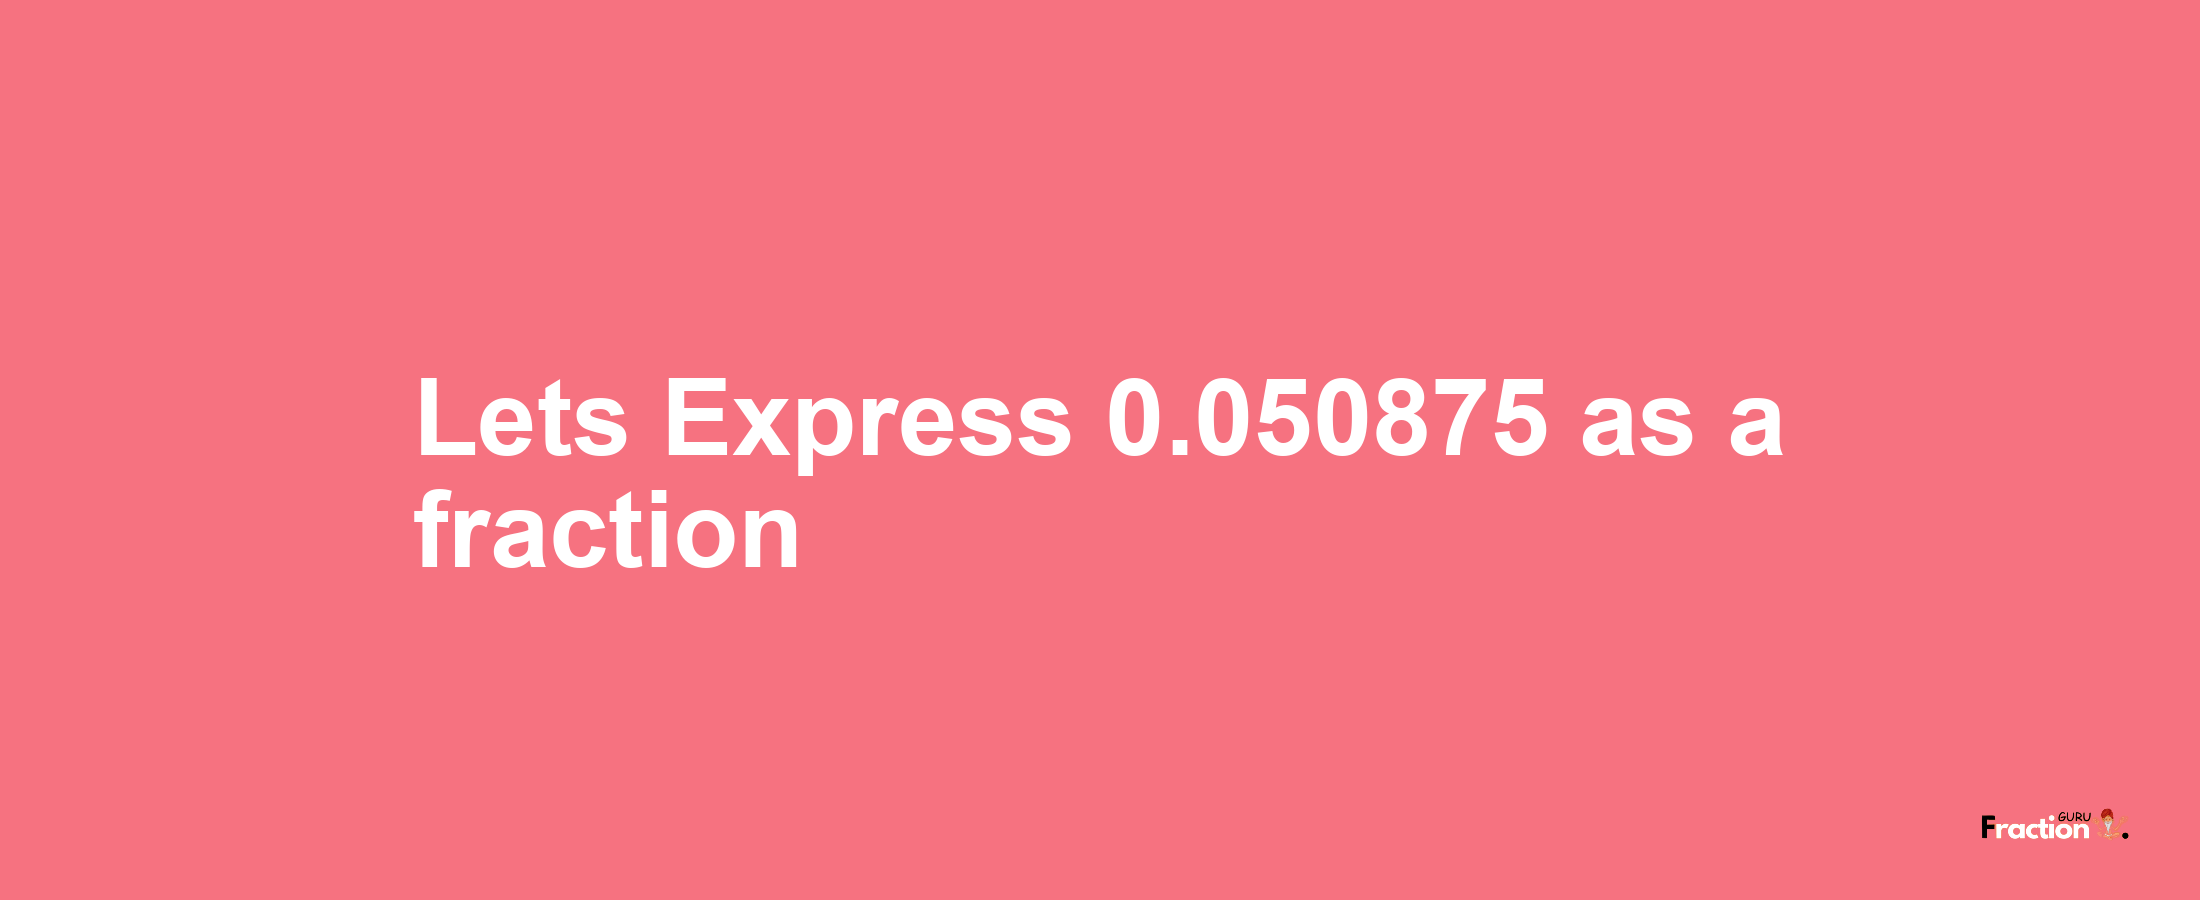 Lets Express 0.050875 as afraction